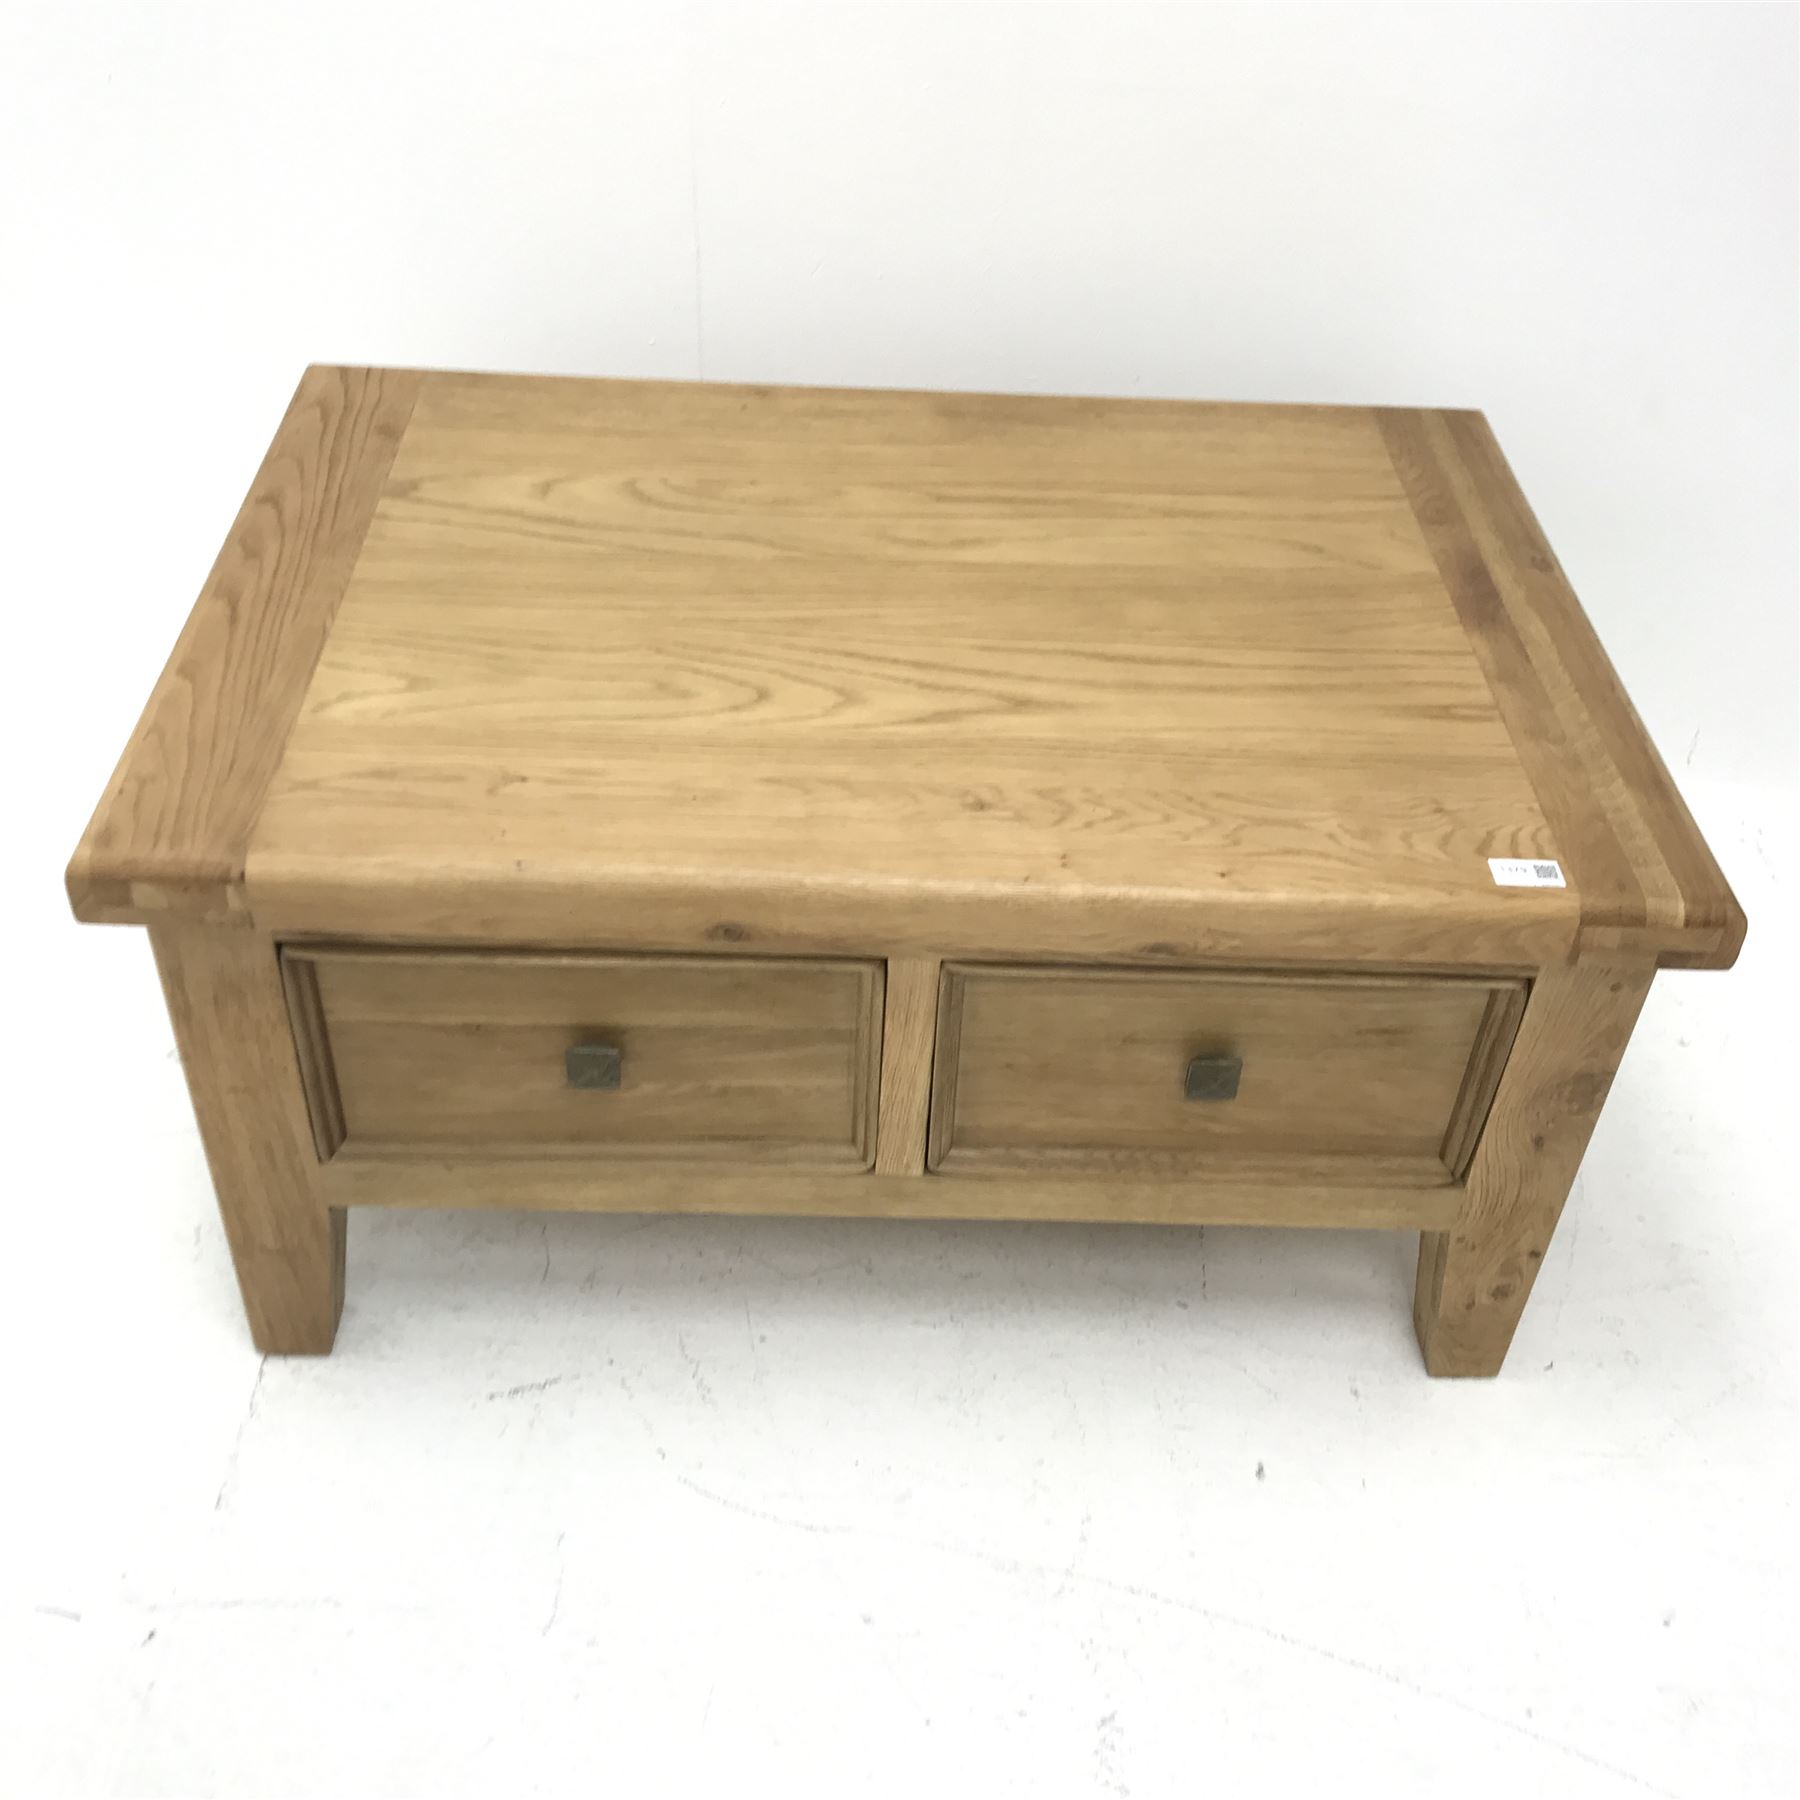 Rectangular oak coffee table with two through drawers, 90cm x 60cm, H45cm - Image 4 of 5